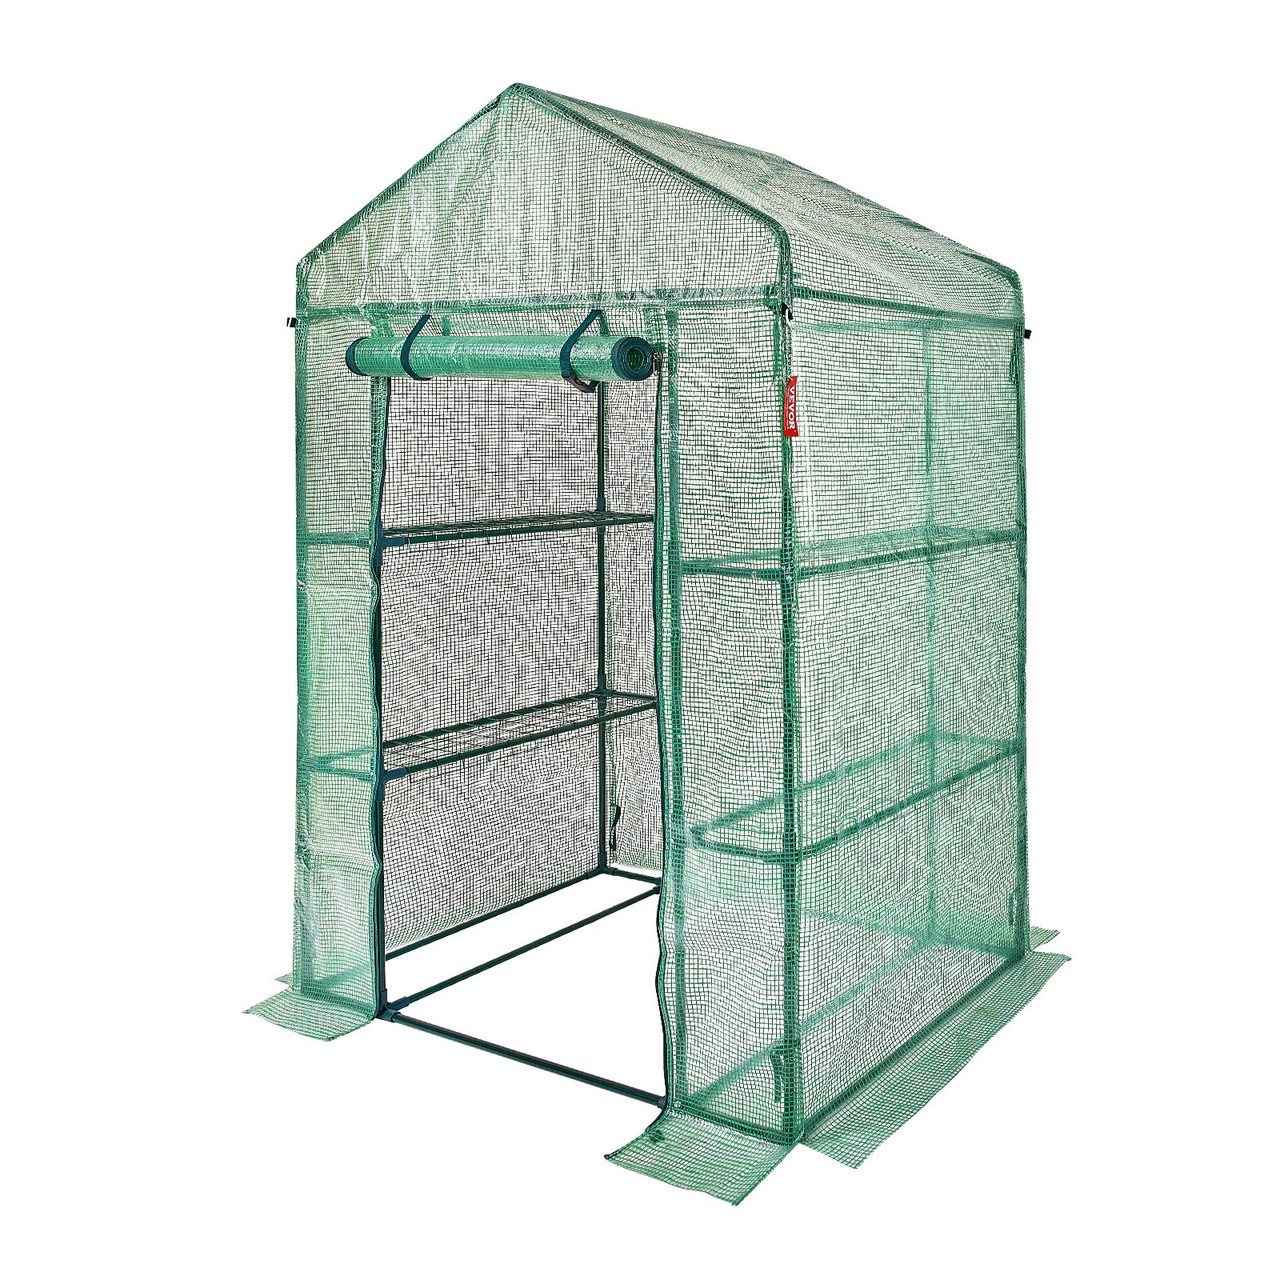 VEVOR Walk-in Green House, 4.6 x 2.4 x 6.7 ft, Greenhouse with Shelves, High Strength PE Cover with Doors, Windows and Steel Frame, Set Up in Minutes, for Planting and Storage